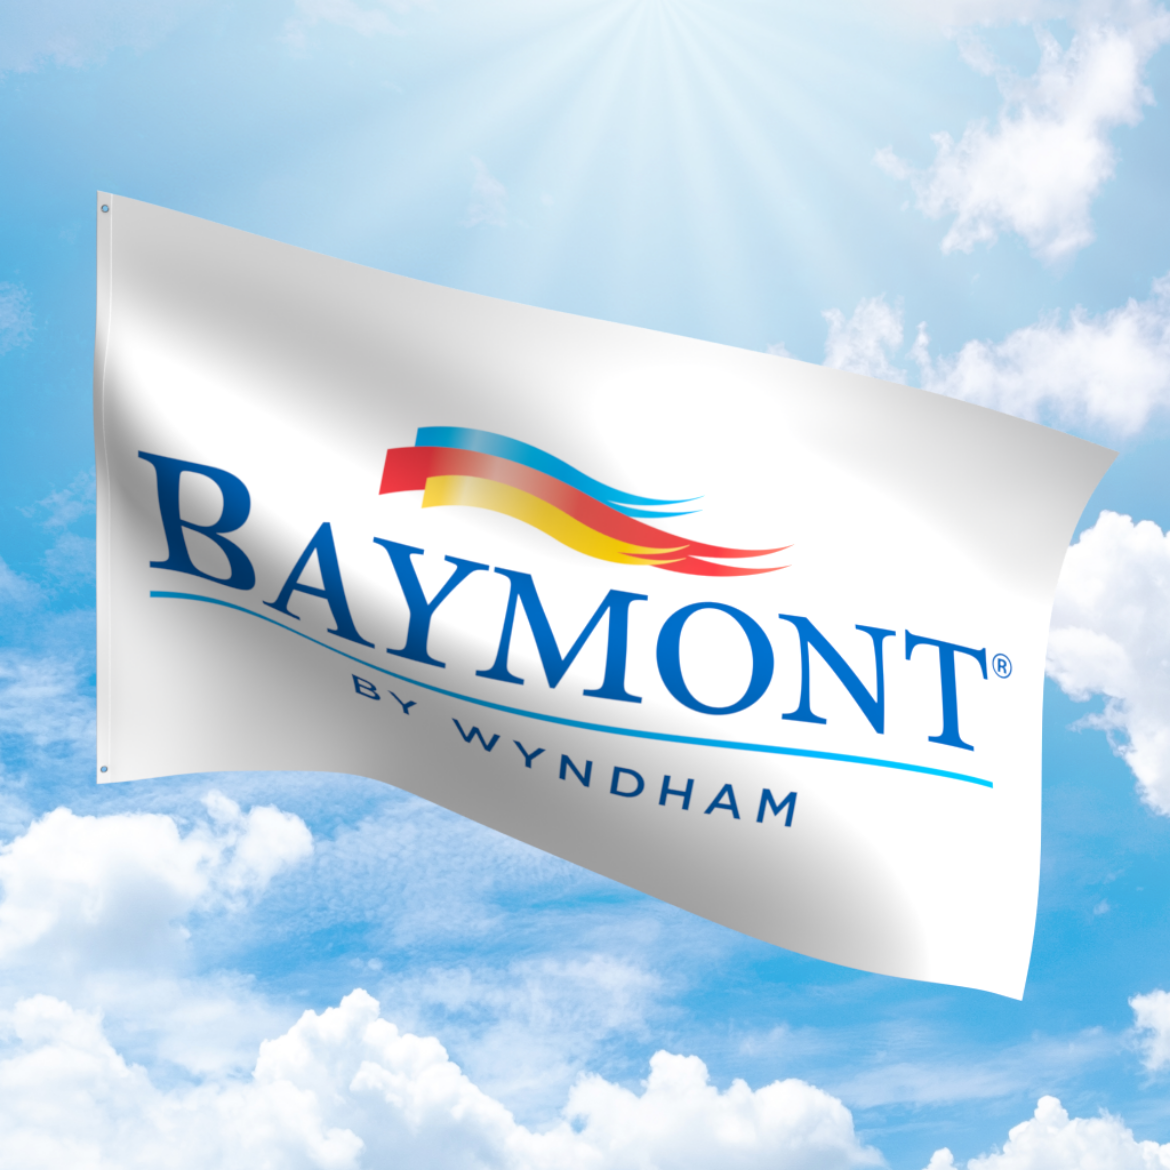 Picture of Baymont Flag